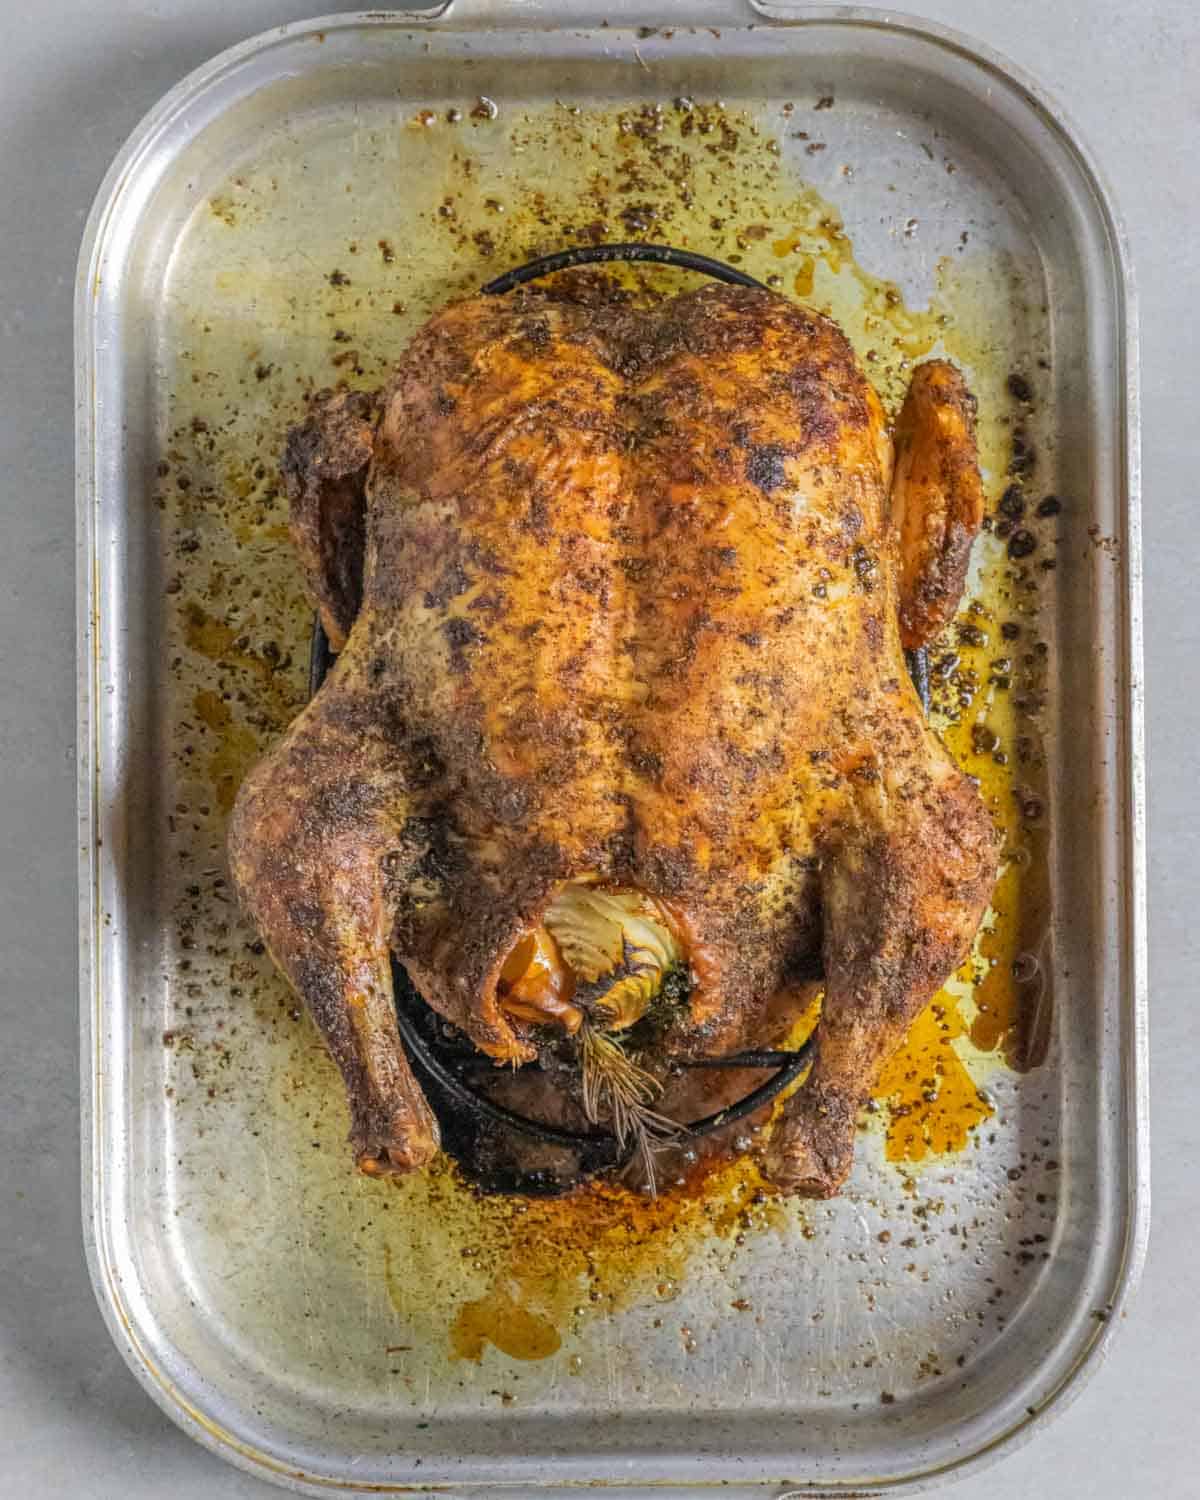 Baked whole chicken fresh from the oven in a roasting pan.